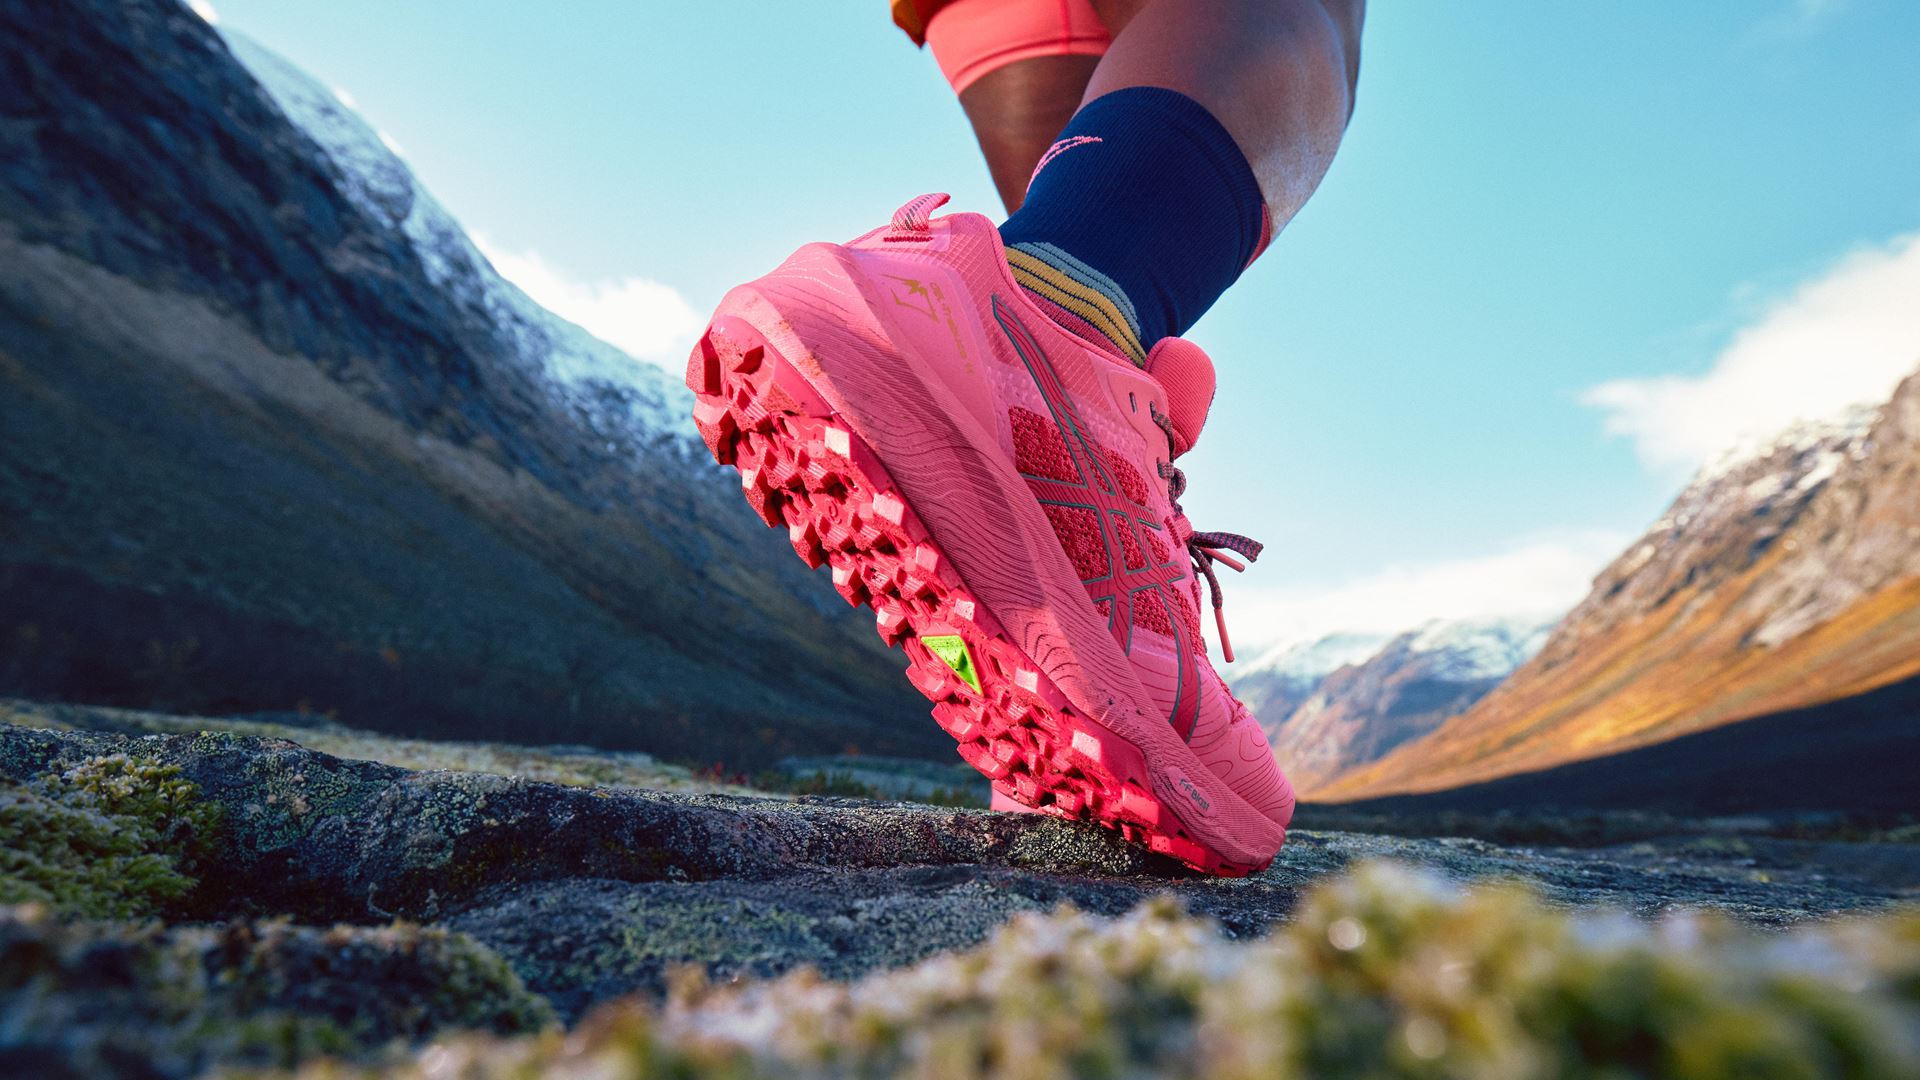 ASICS' GEL-TRABUCO™ 11 trail shoe offers 360° protection